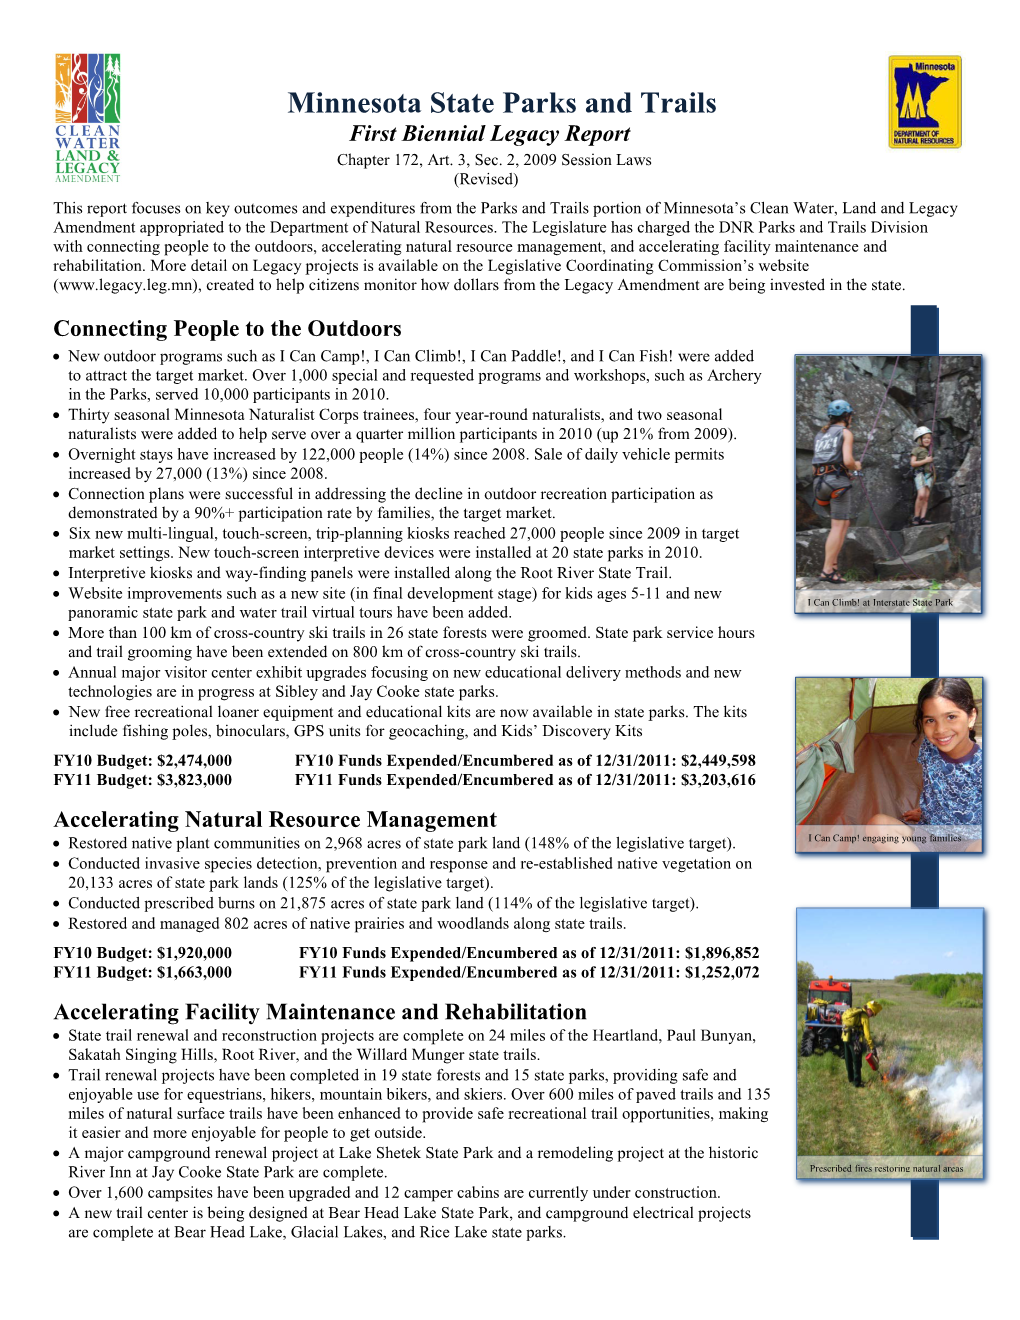 Minnesota State Parks and Trails First Biennial Legacy Report Chapter 172, Art